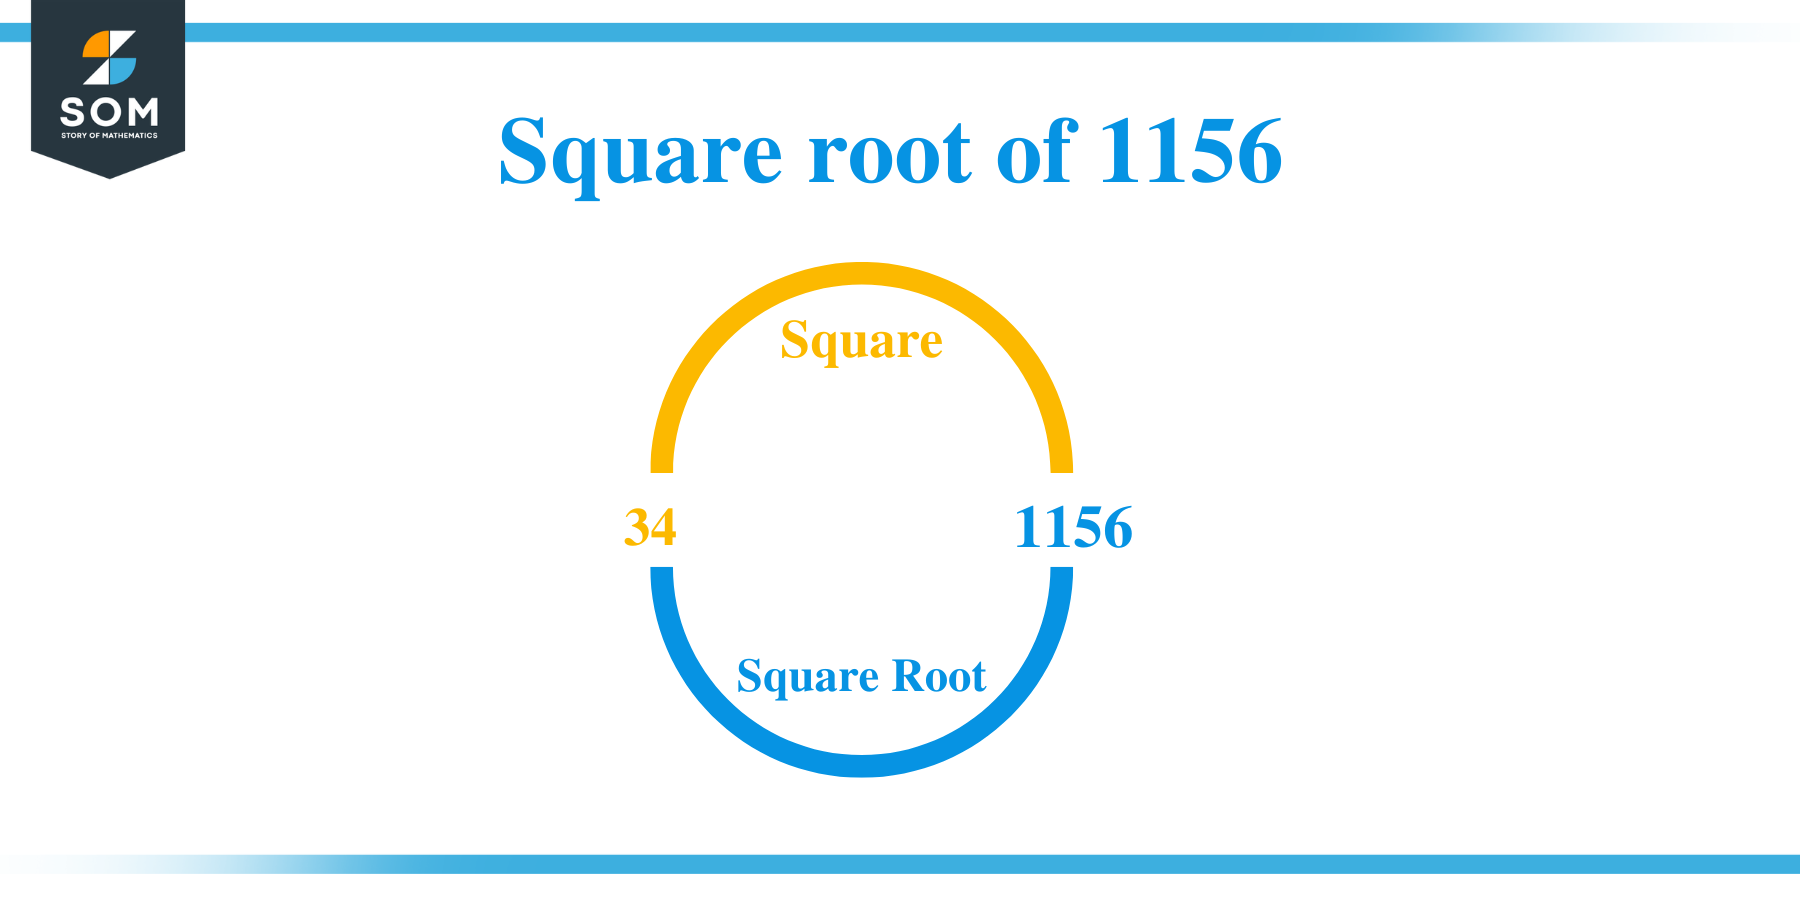 Square root of 1156